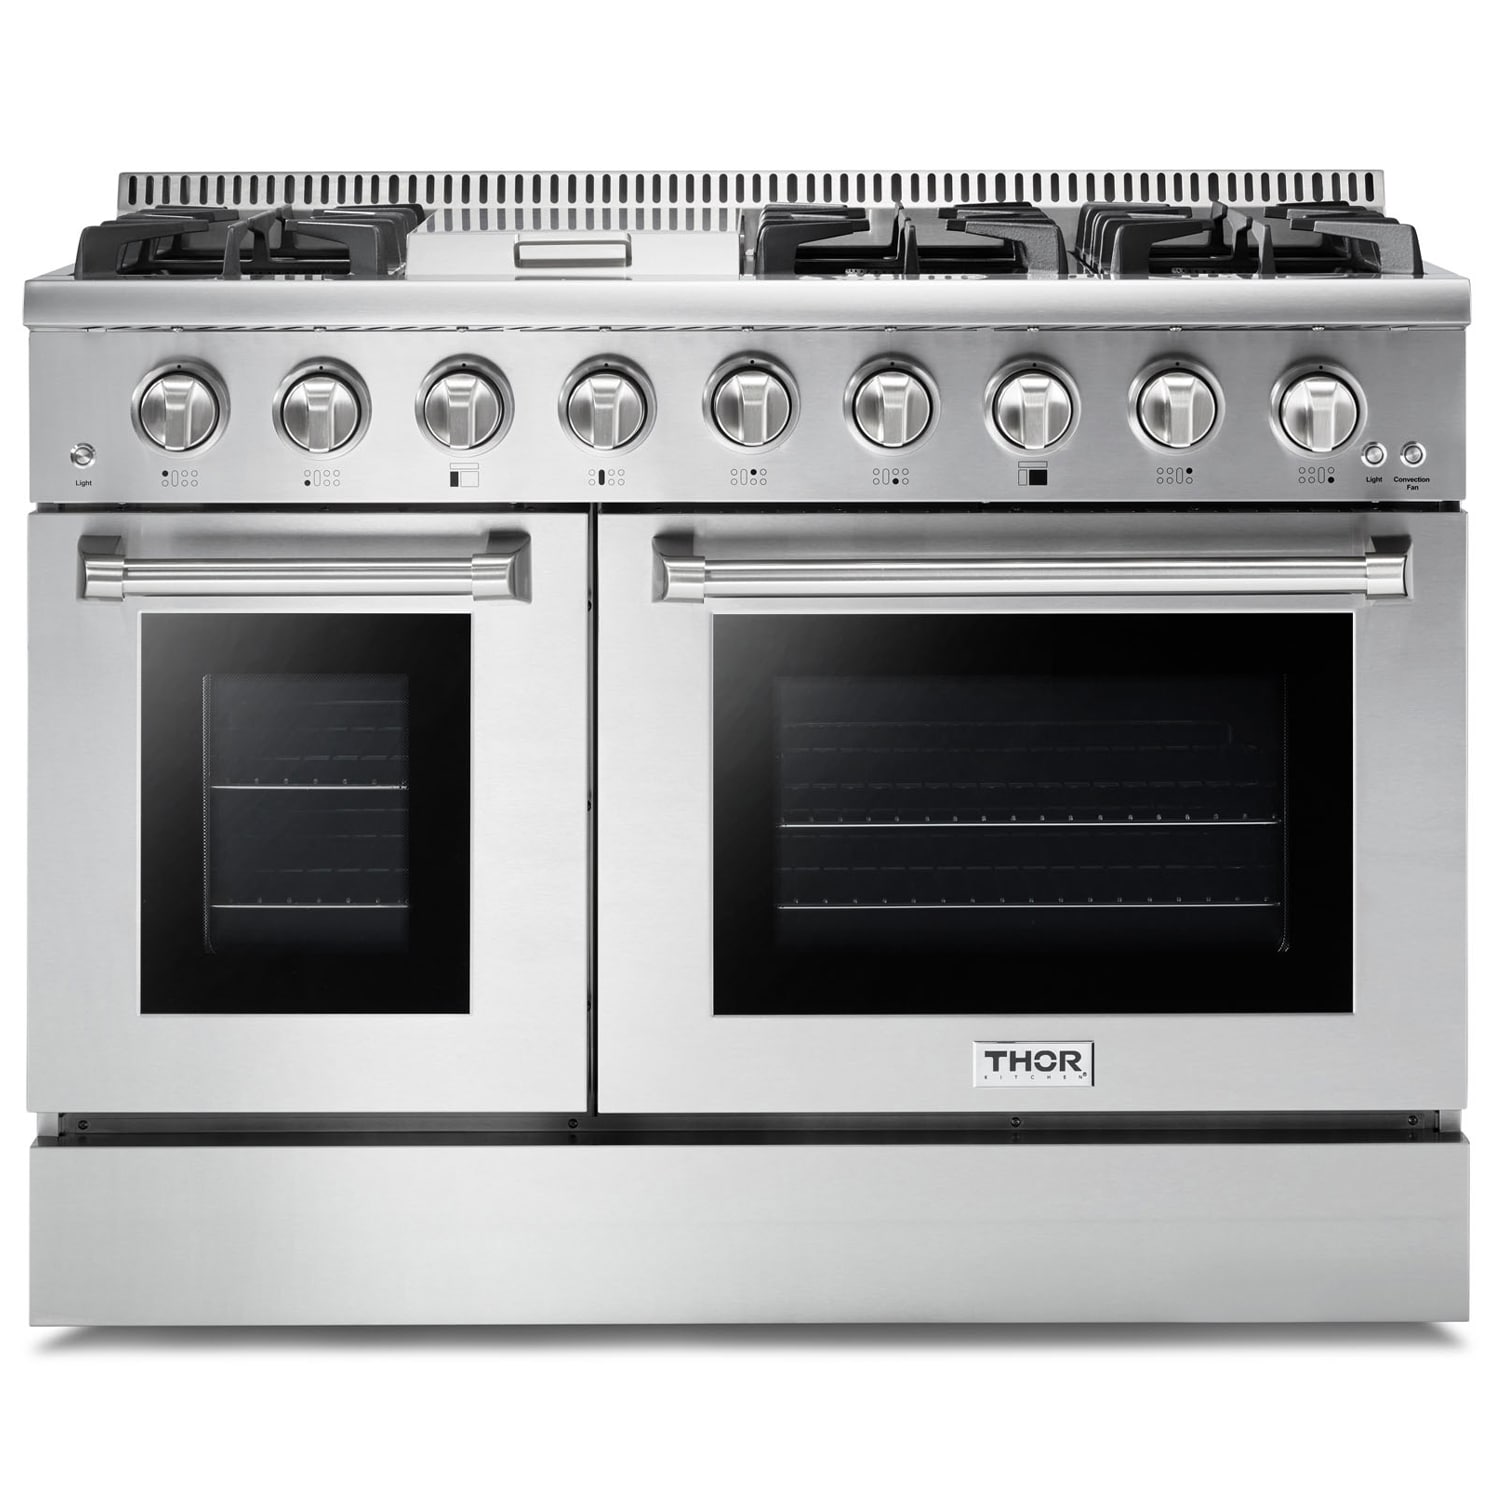 in Stainless Steel Freestanding Gas Range with 4 Burners Continuous Cast Iron Grates Thor Kitchen 24 in LRG2401U 3.7 Cu Ft 